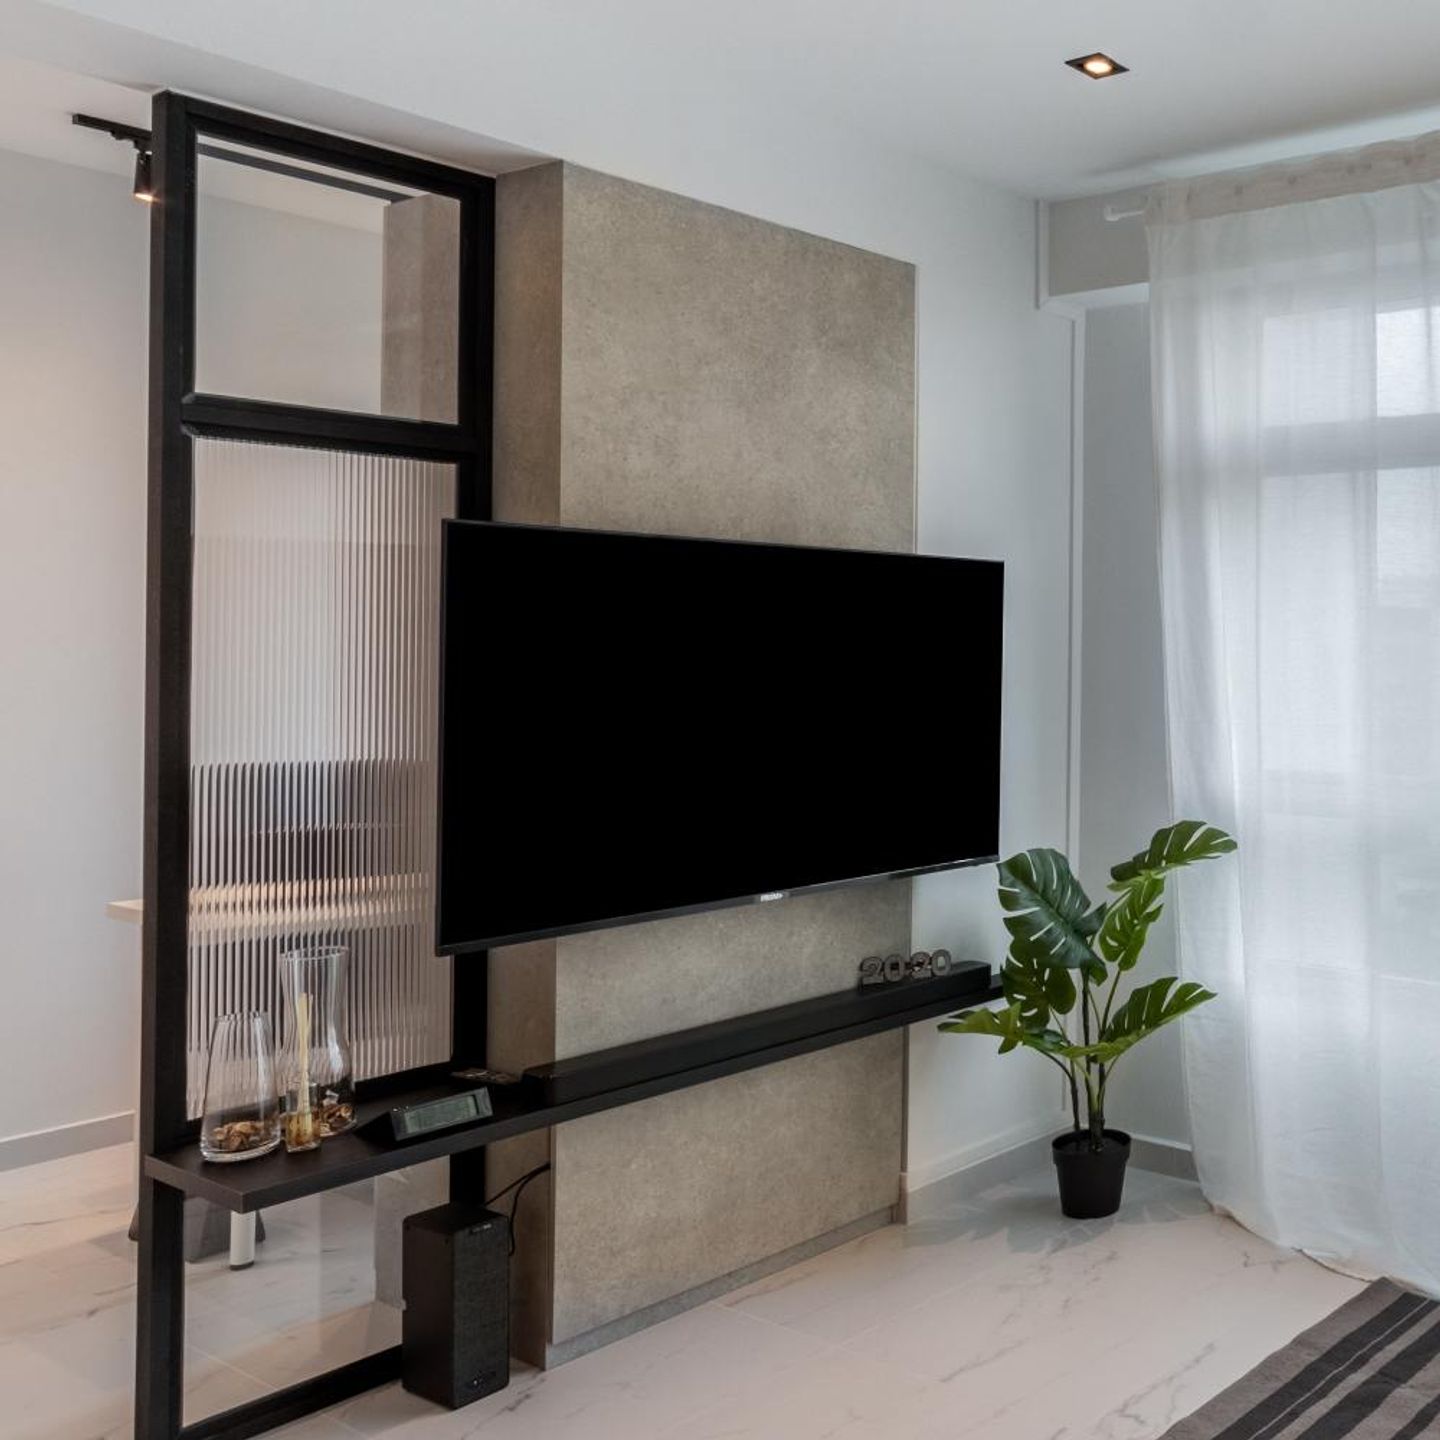 Wall-Mounted Modern TV Cabinet Design With Wall Ledges